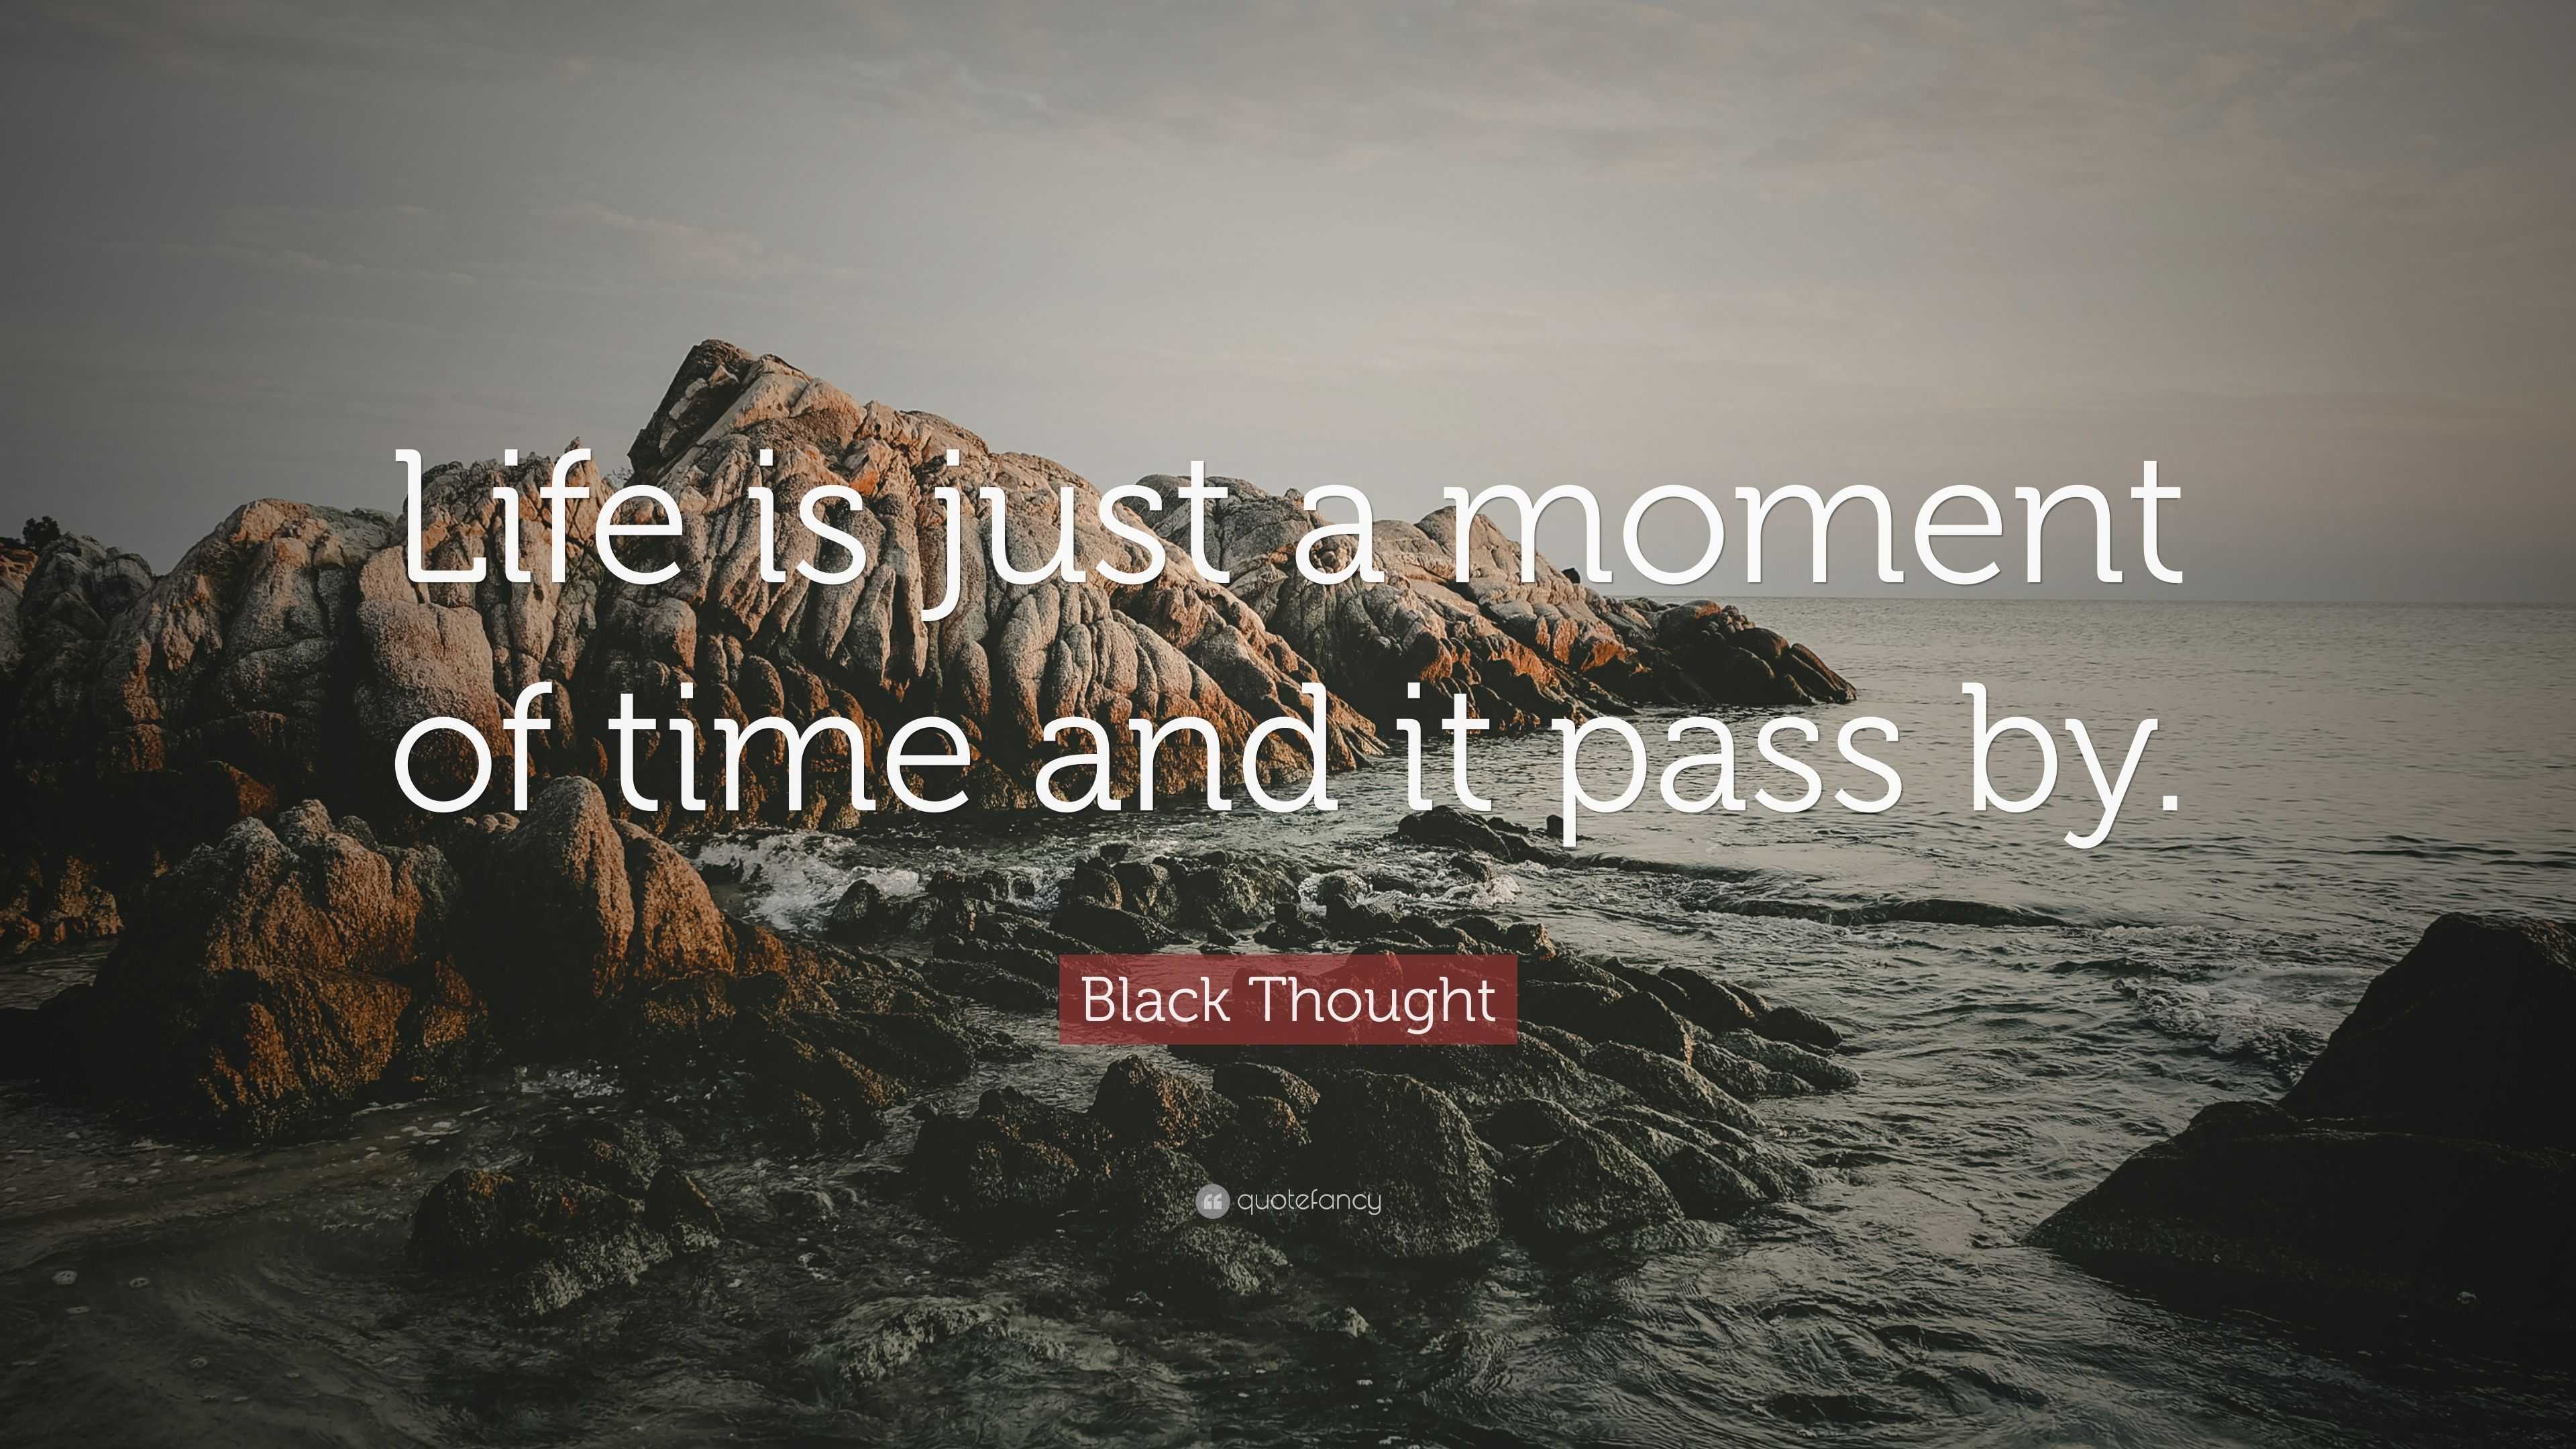 Black Thought Quote: “Life is a moment of time and it pass by.”